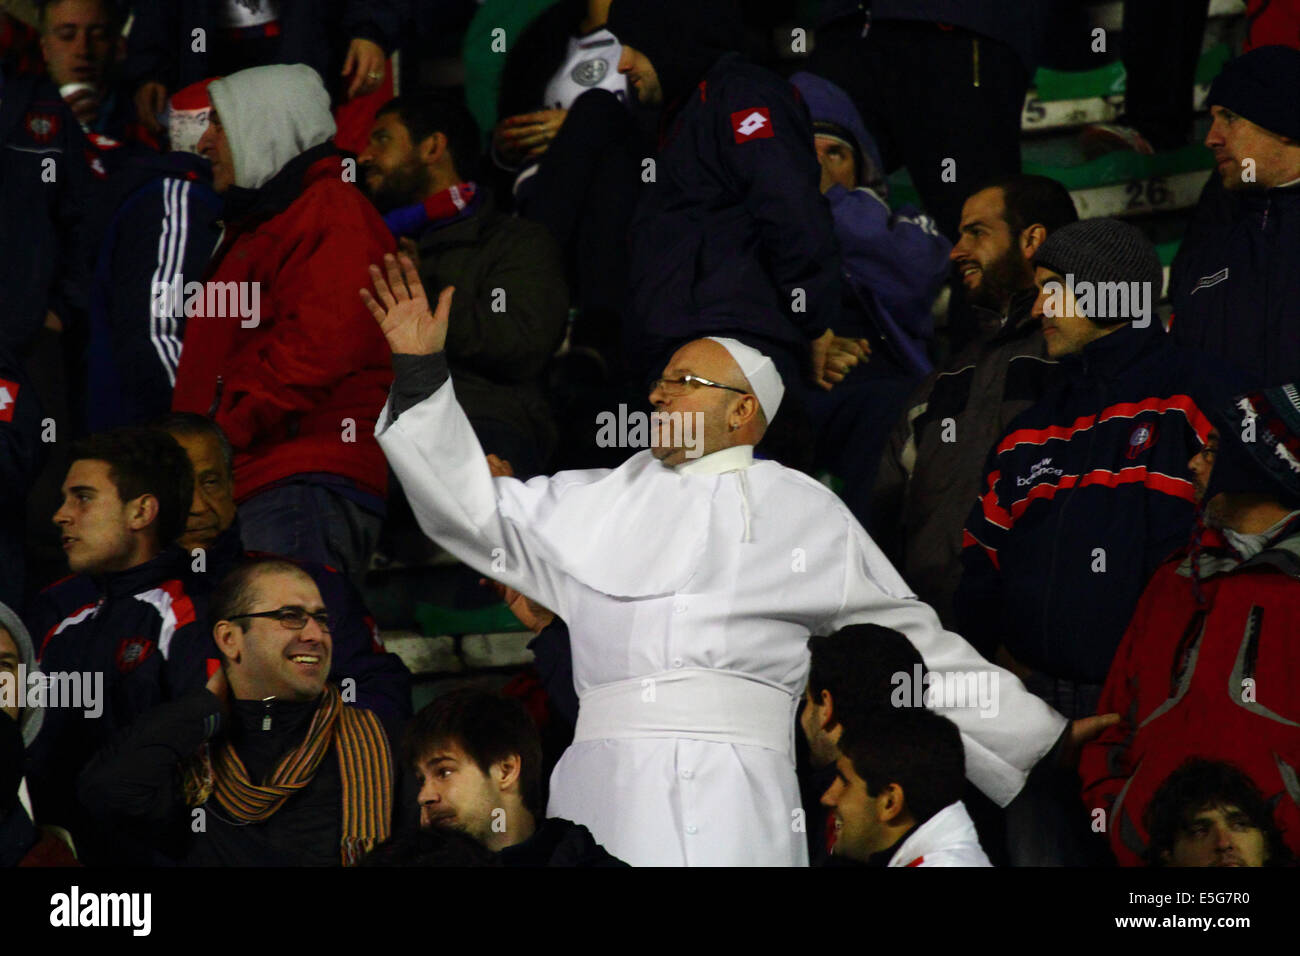 La Paz, Bolivia. 30th July, 2014.  A San Lorenzo fan dressed as Pope Francis watches his team during a second leg of a Copa Libertadores 2014 semi final match at the Hernando Siles Stadium. San Lorenzo won the first leg 5-0; Bolívar the return leg 1-0. Pope Francis is well known for his interest in football / soccer and support for the San Lorenzo team. Credit:  James Brunker / Alamy Live News Stock Photo